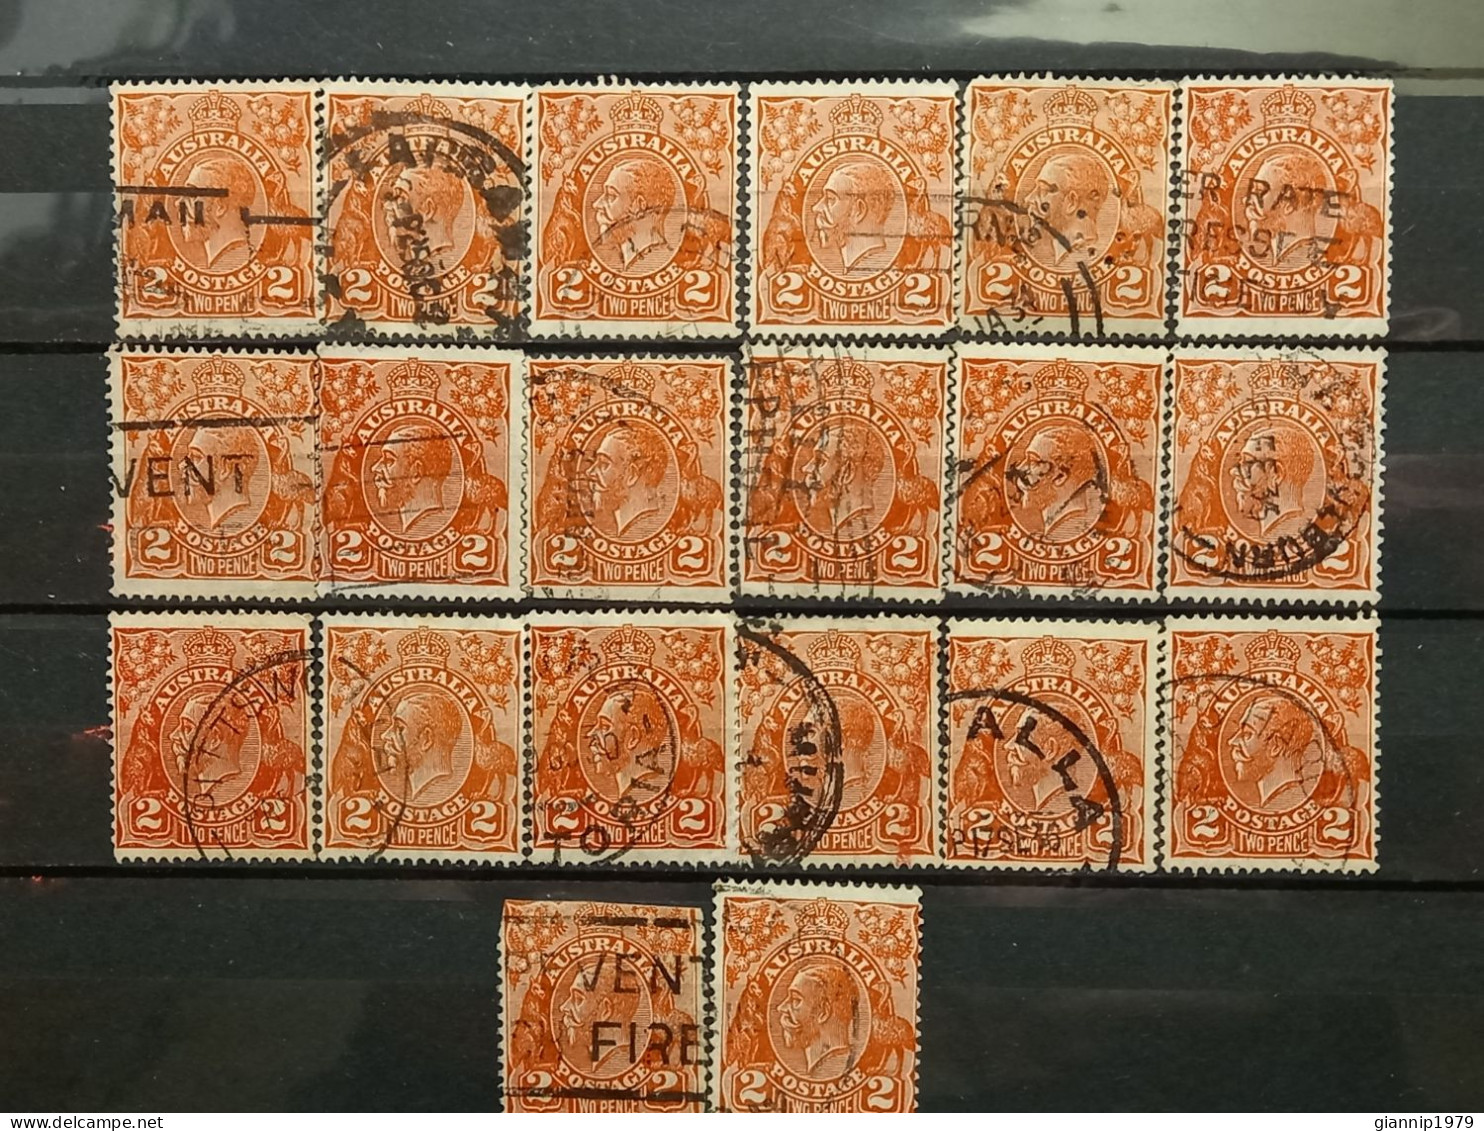 FRANCOBOLLI STAMPS AUSTRALIA AUSTRALIAN 1926 USED SERIE RE GIORGIO KING GEORGE 2 TWO PENCE 20 PZ OBLITERE' - Used Stamps